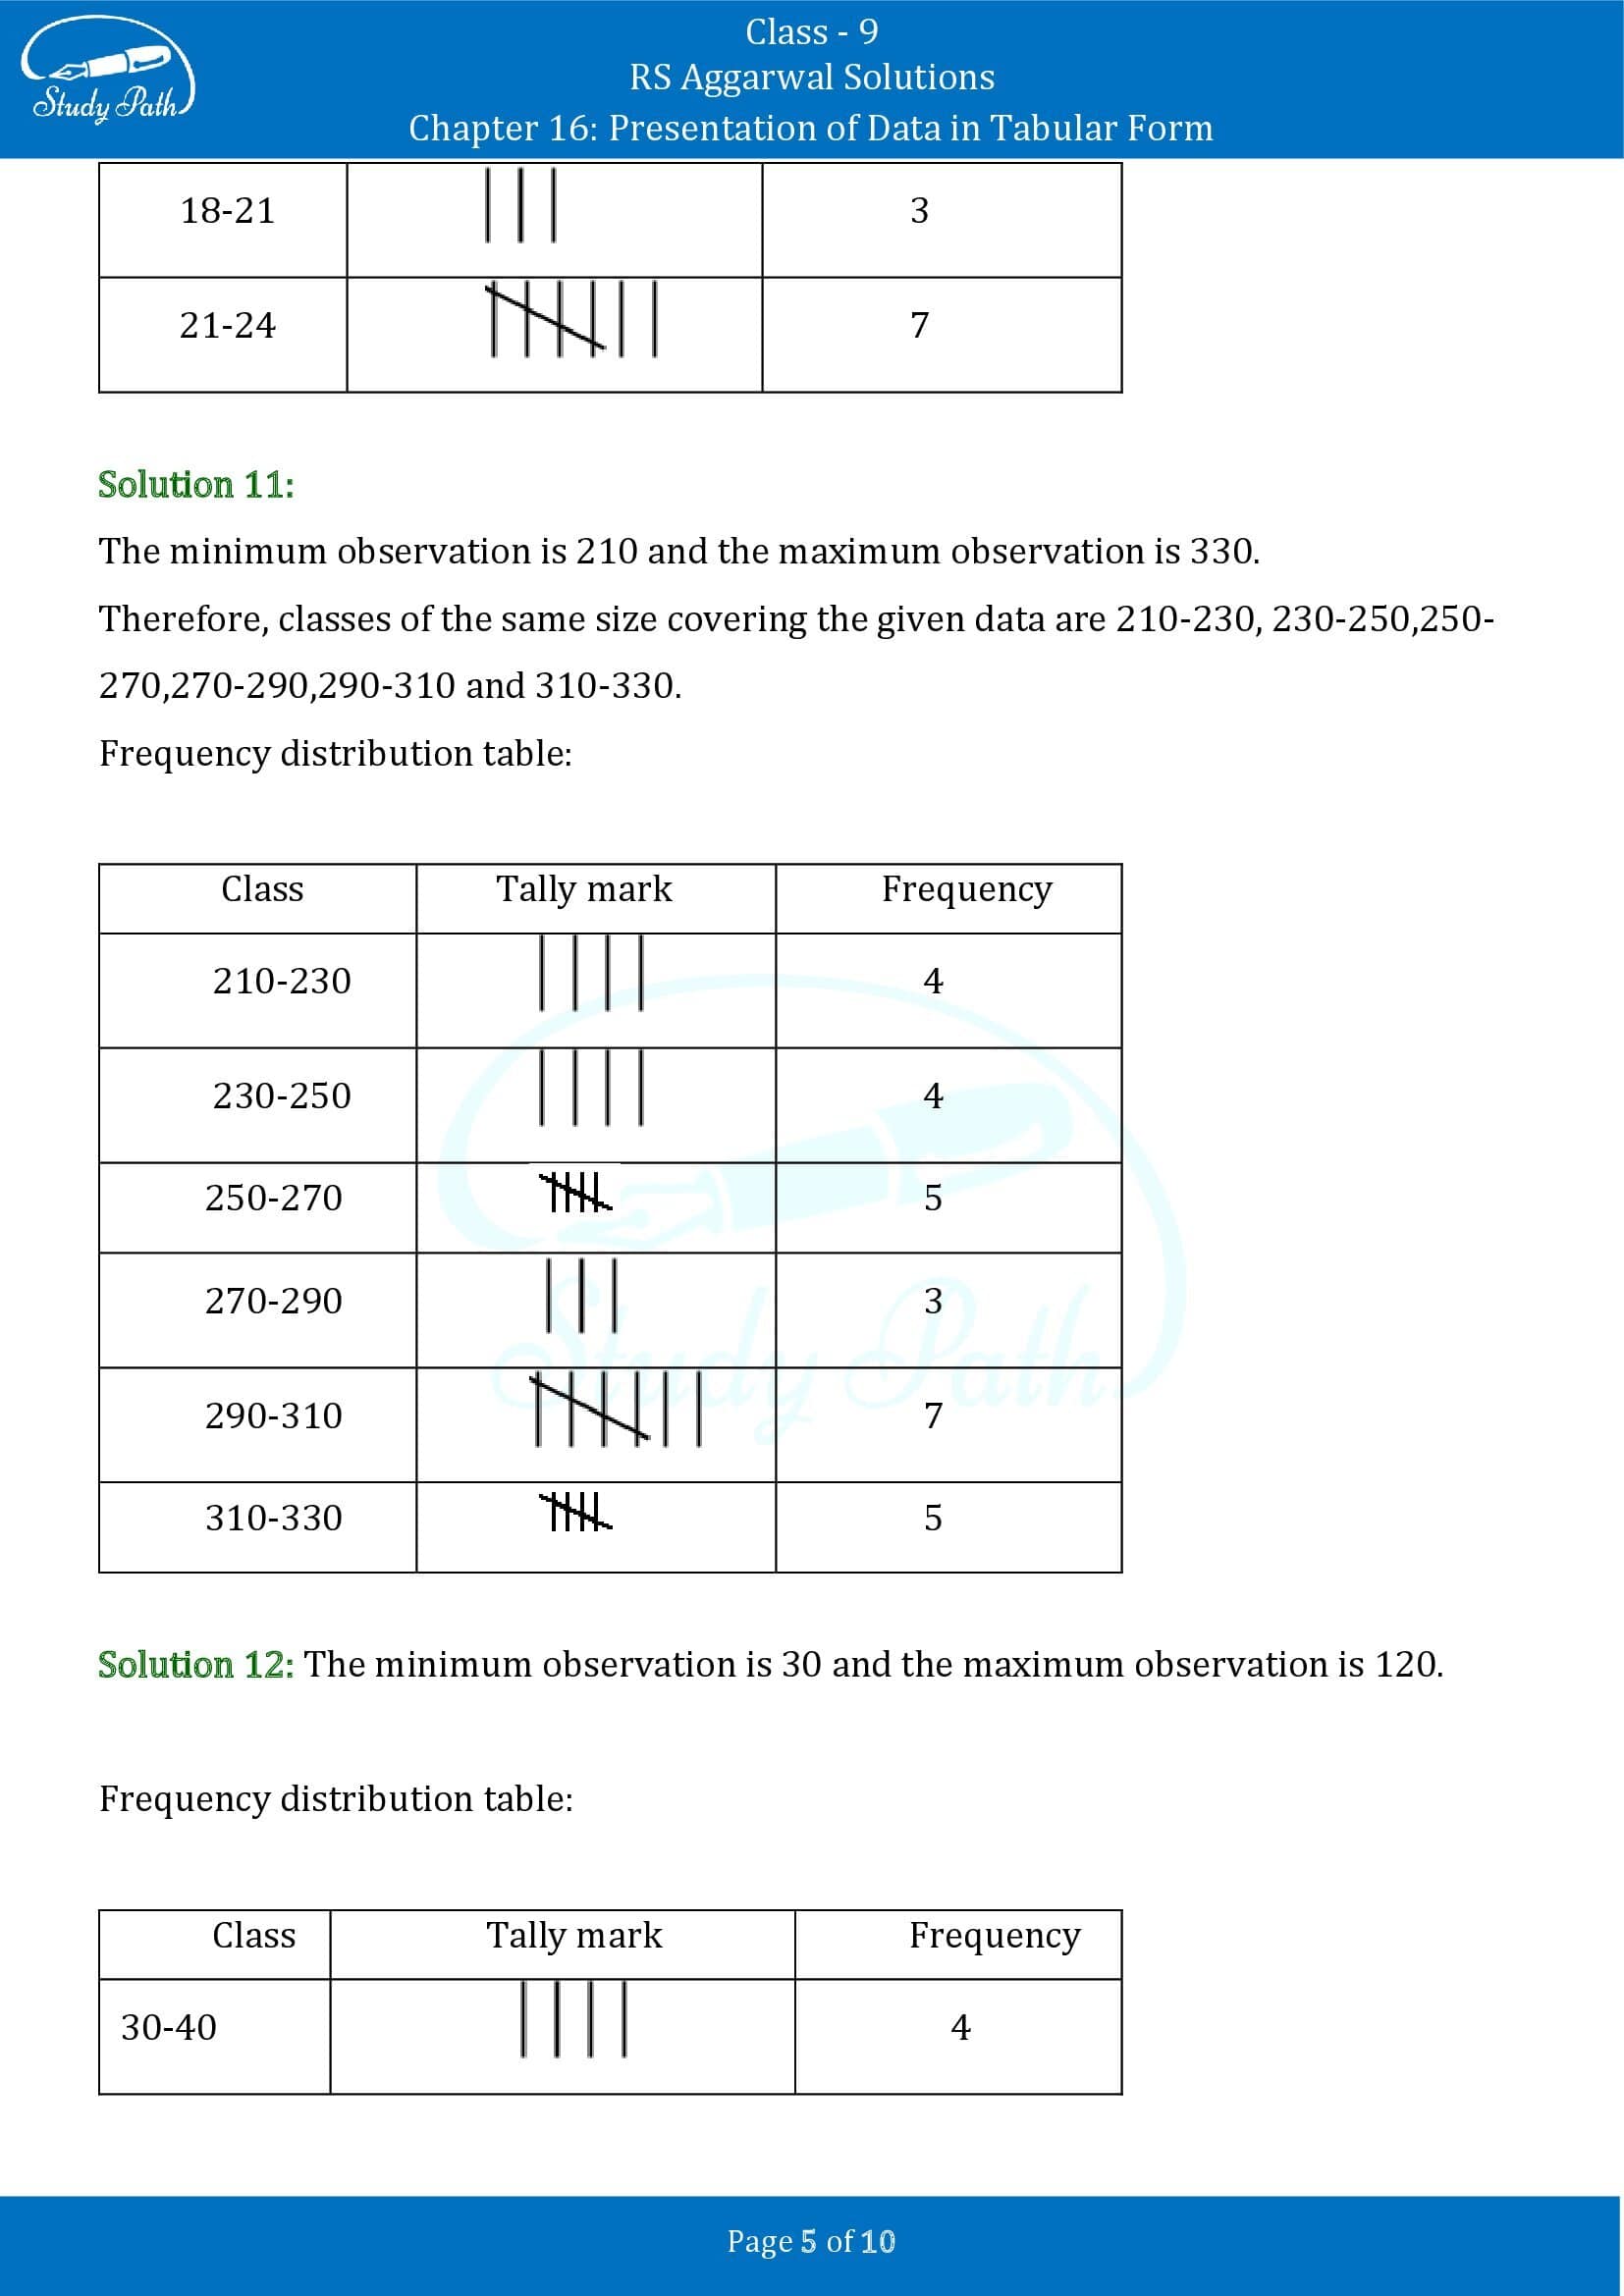 RS Aggarwal Solutions Class 9 Chapter 16 Presentation Of Data In Tabular Form Exercise 16 0005